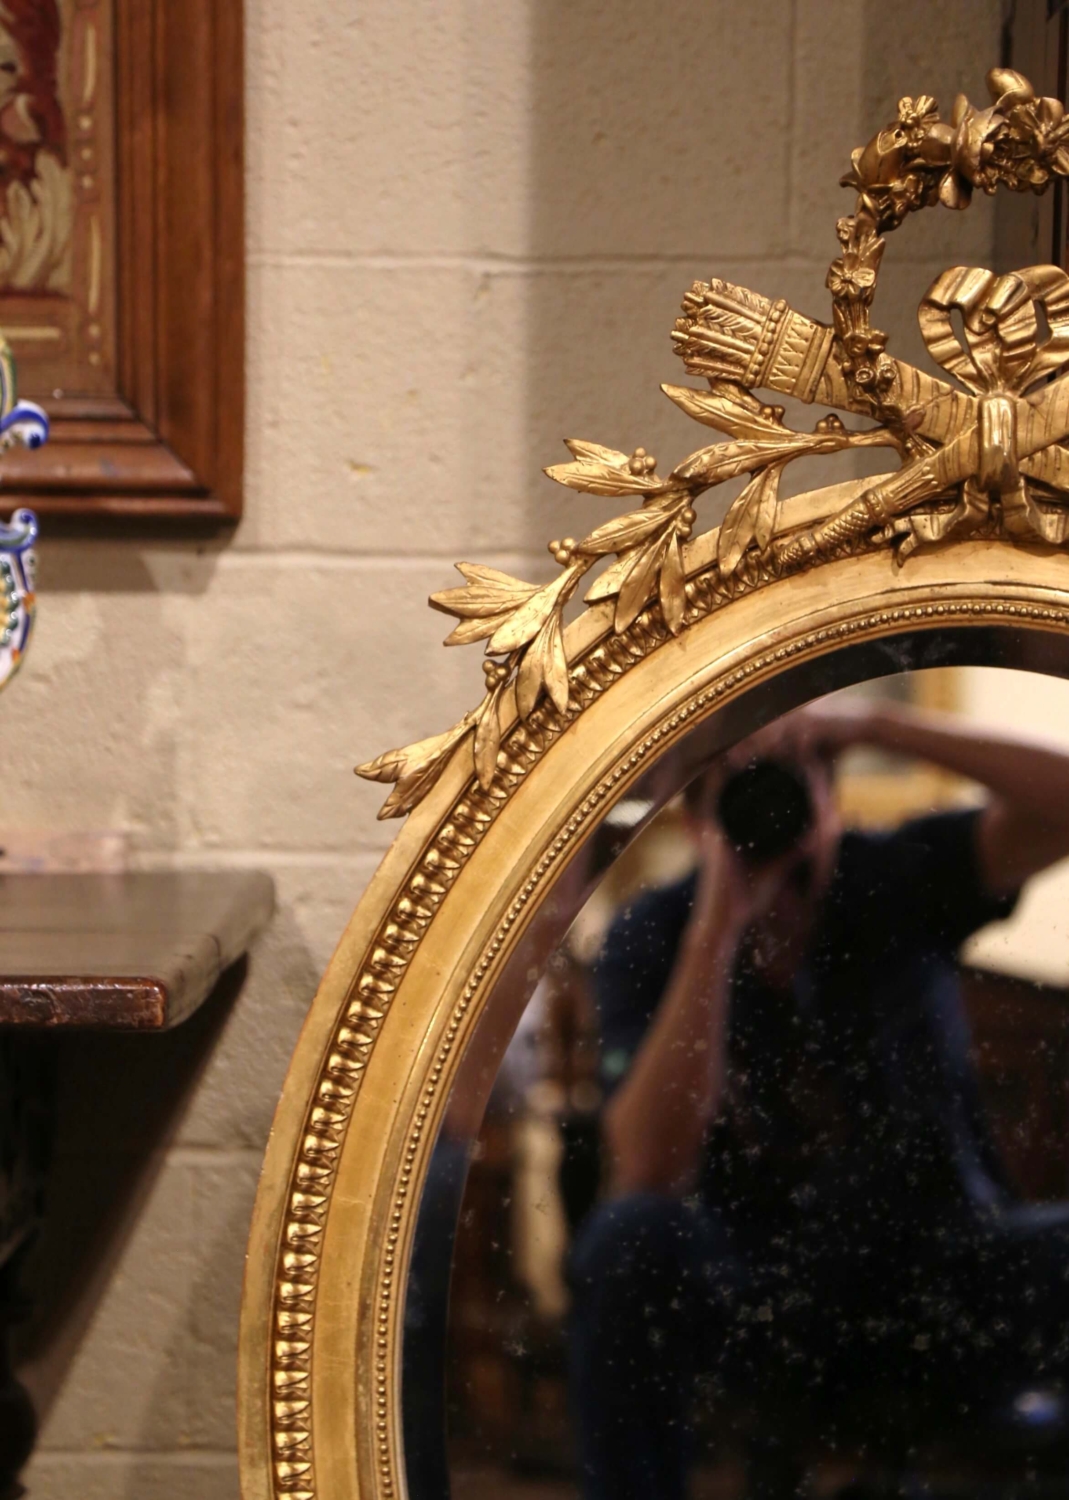 Large 19th C Gilt Wood Bow Cartouche Mirror